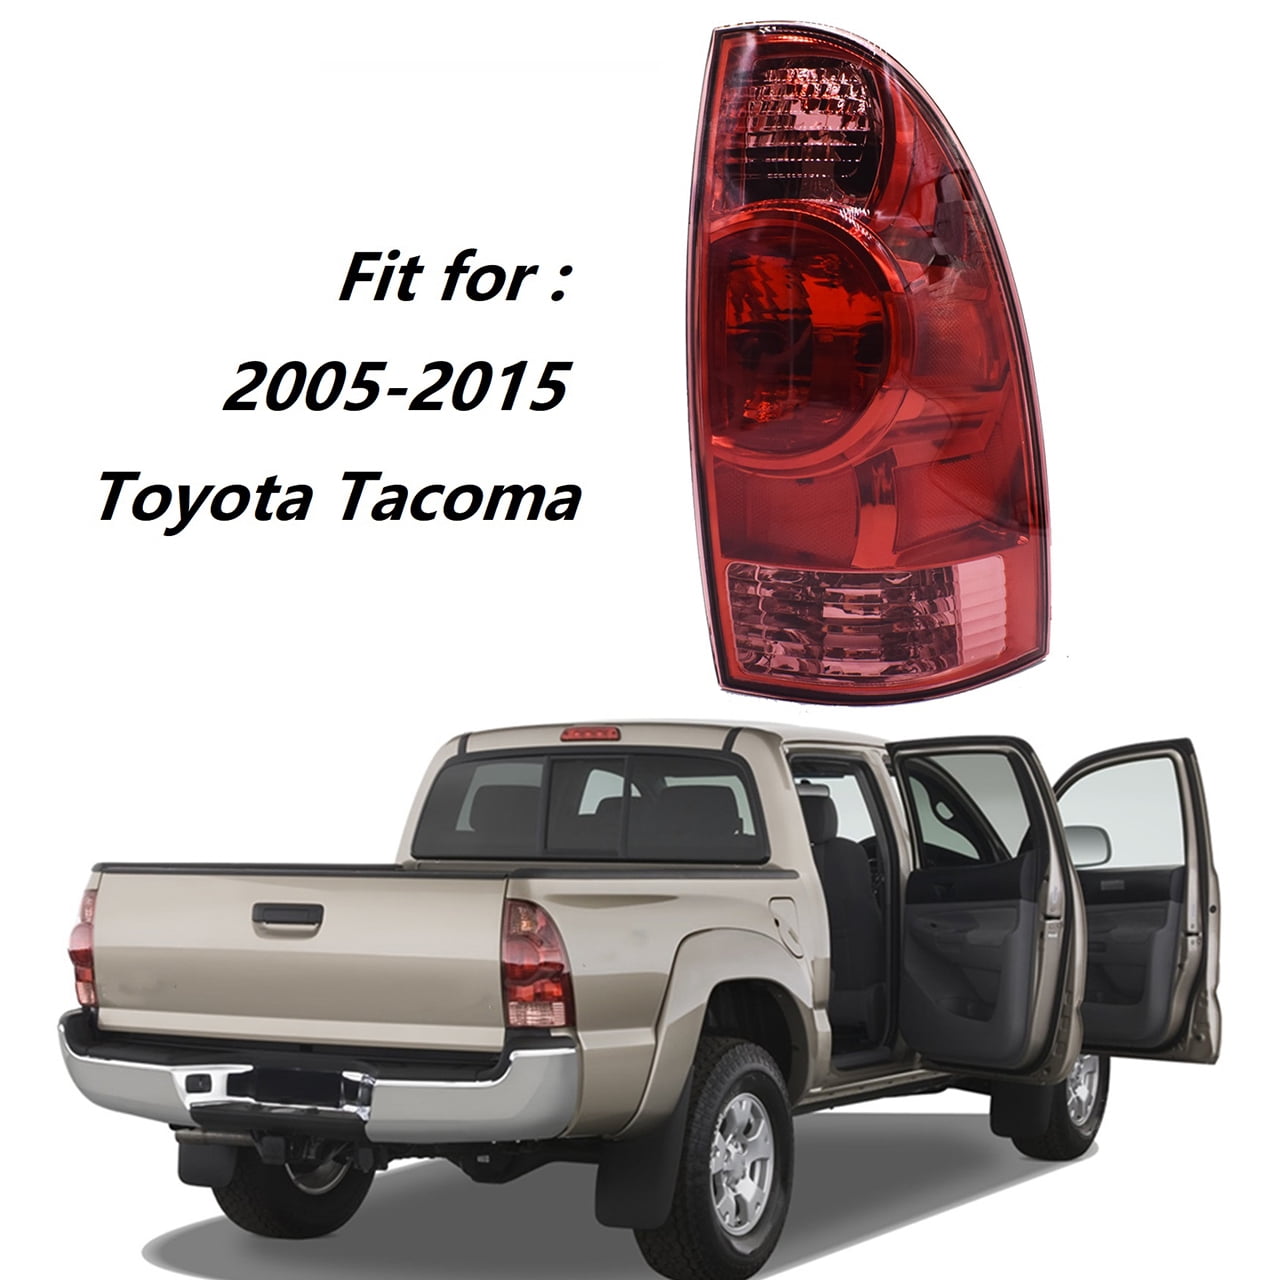 NEW Rear Tailgate For 2005-2015 Toyota Tacoma Primed Truck Tail Gate 